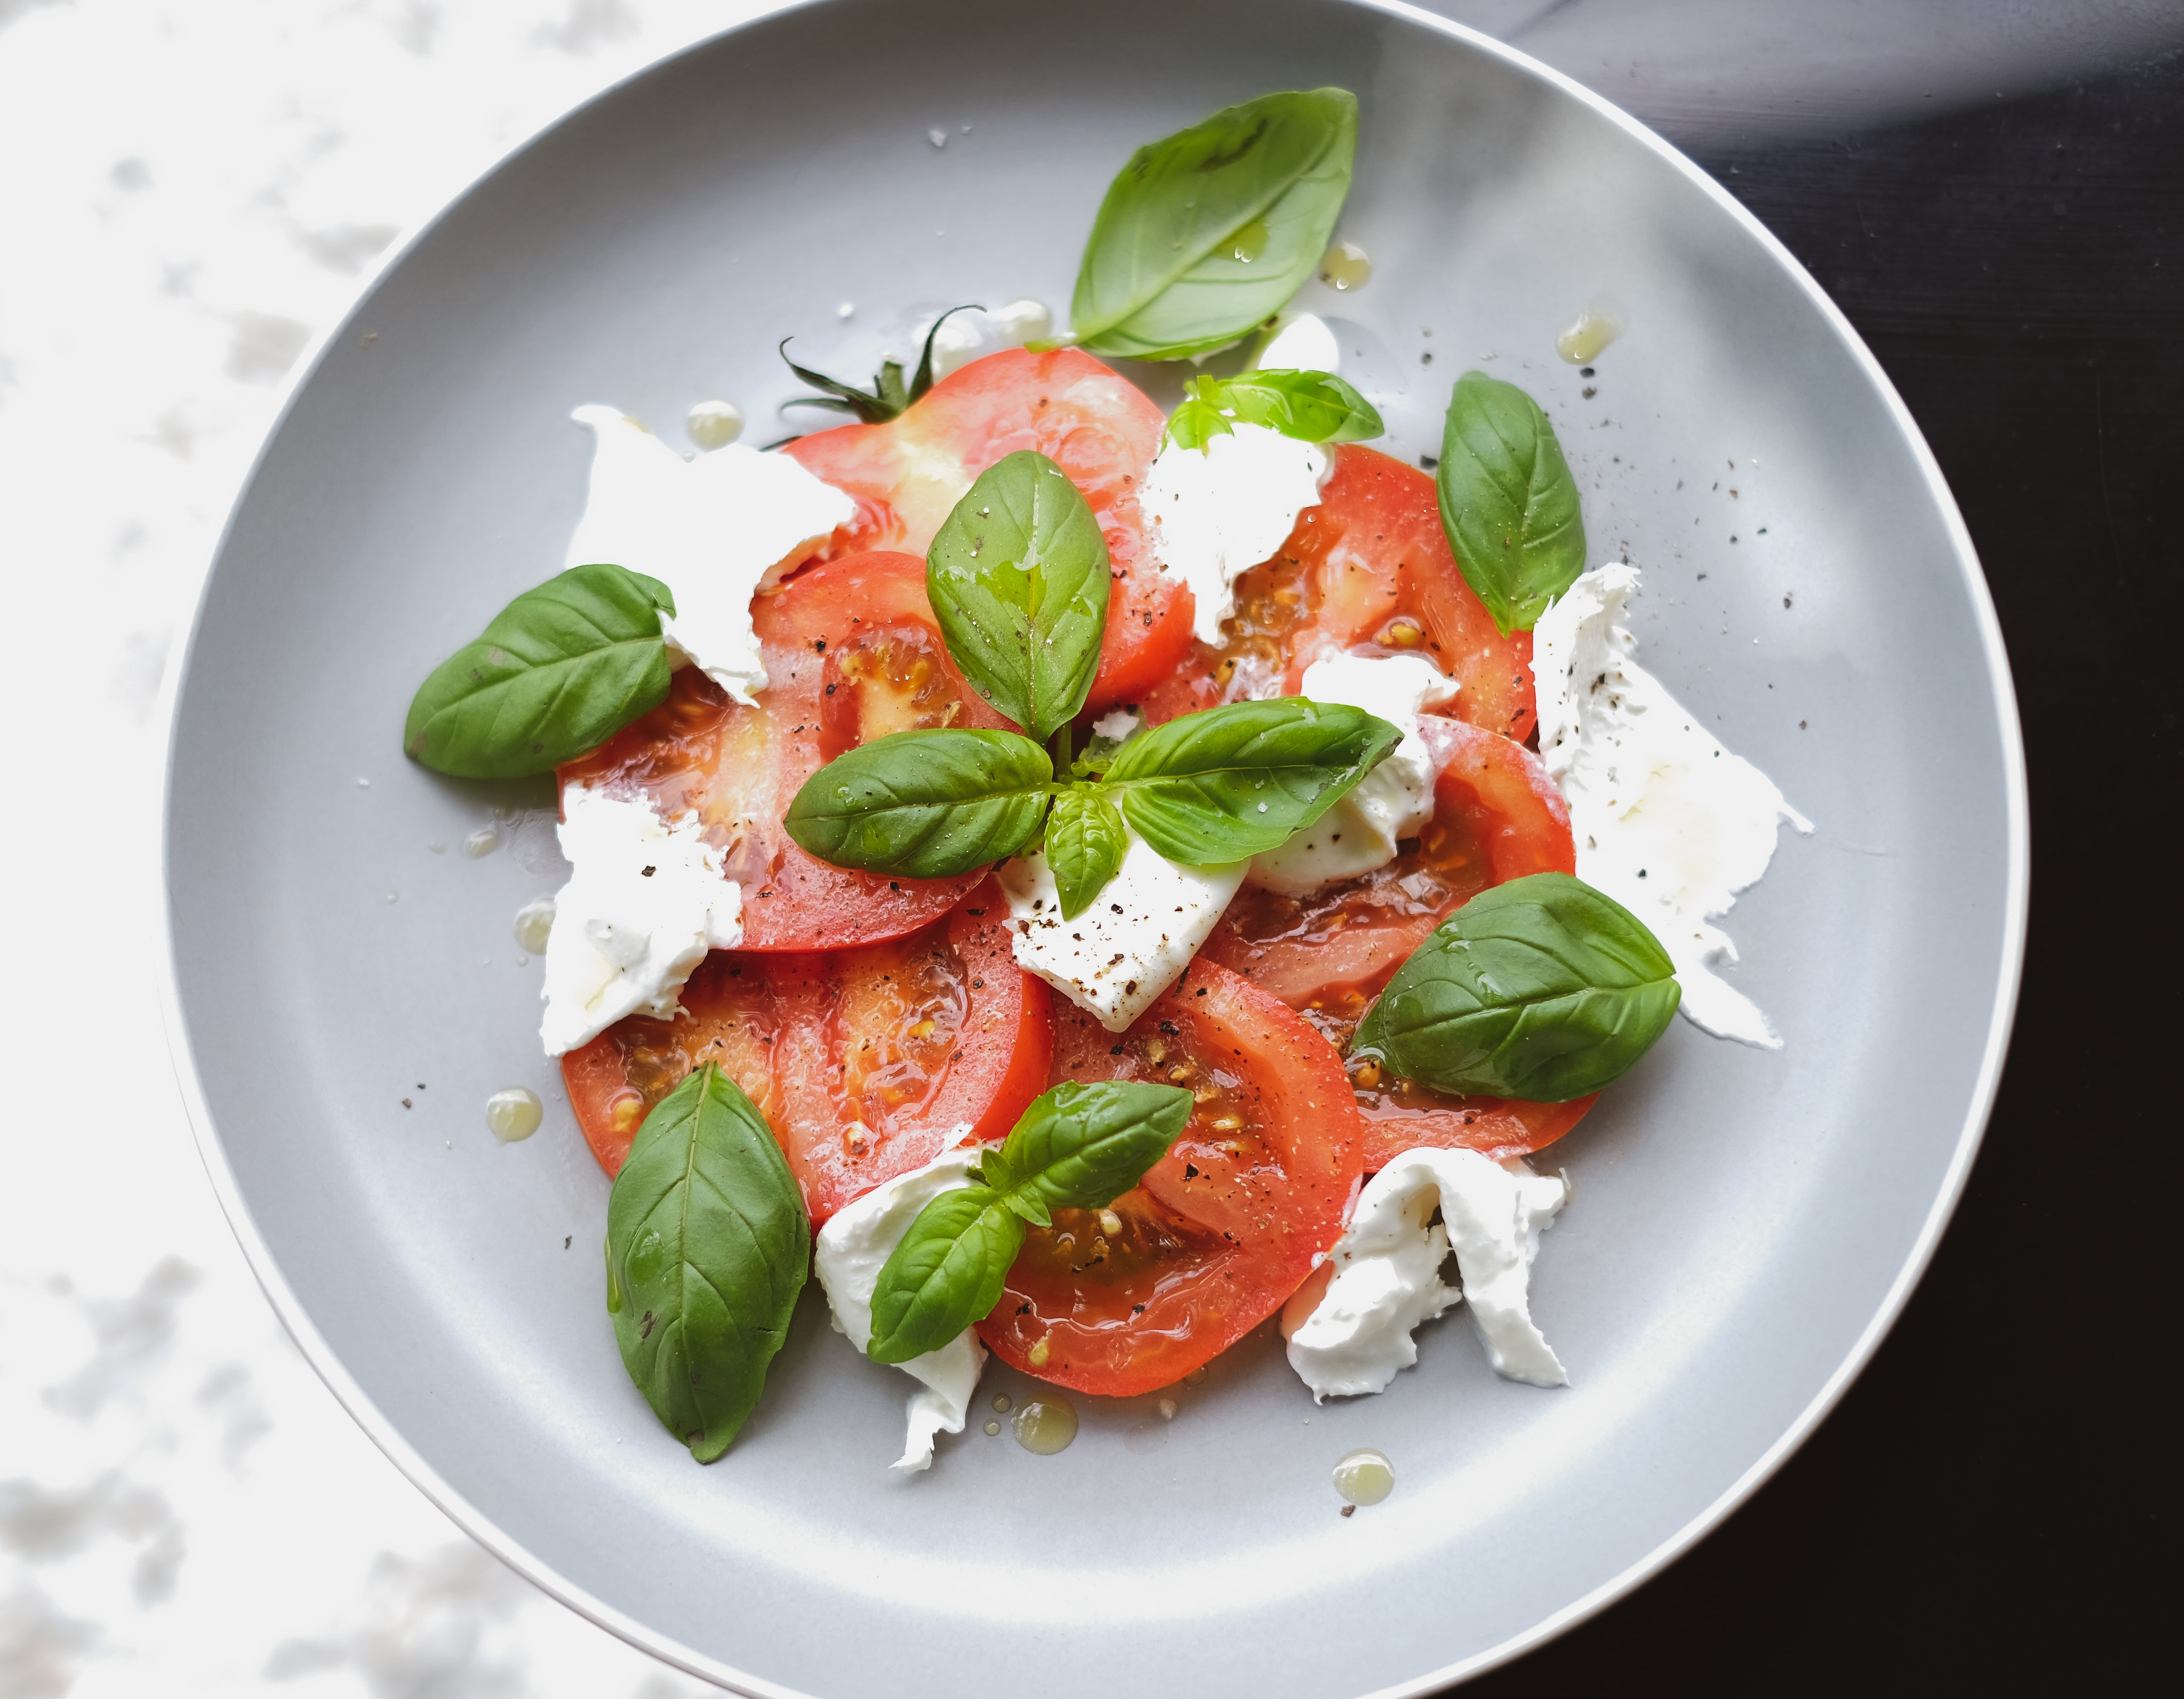 Caprese salad to show summer herbs and spices you should be cooking with